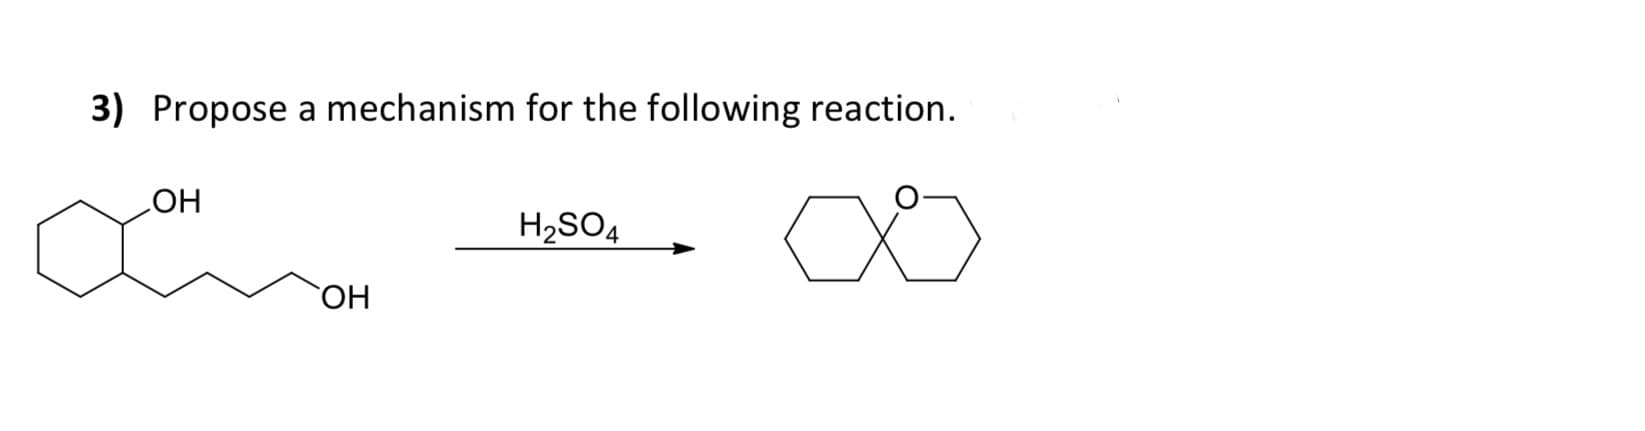 3) Propose a mechanism for the following reaction.
HO
H2SO4
